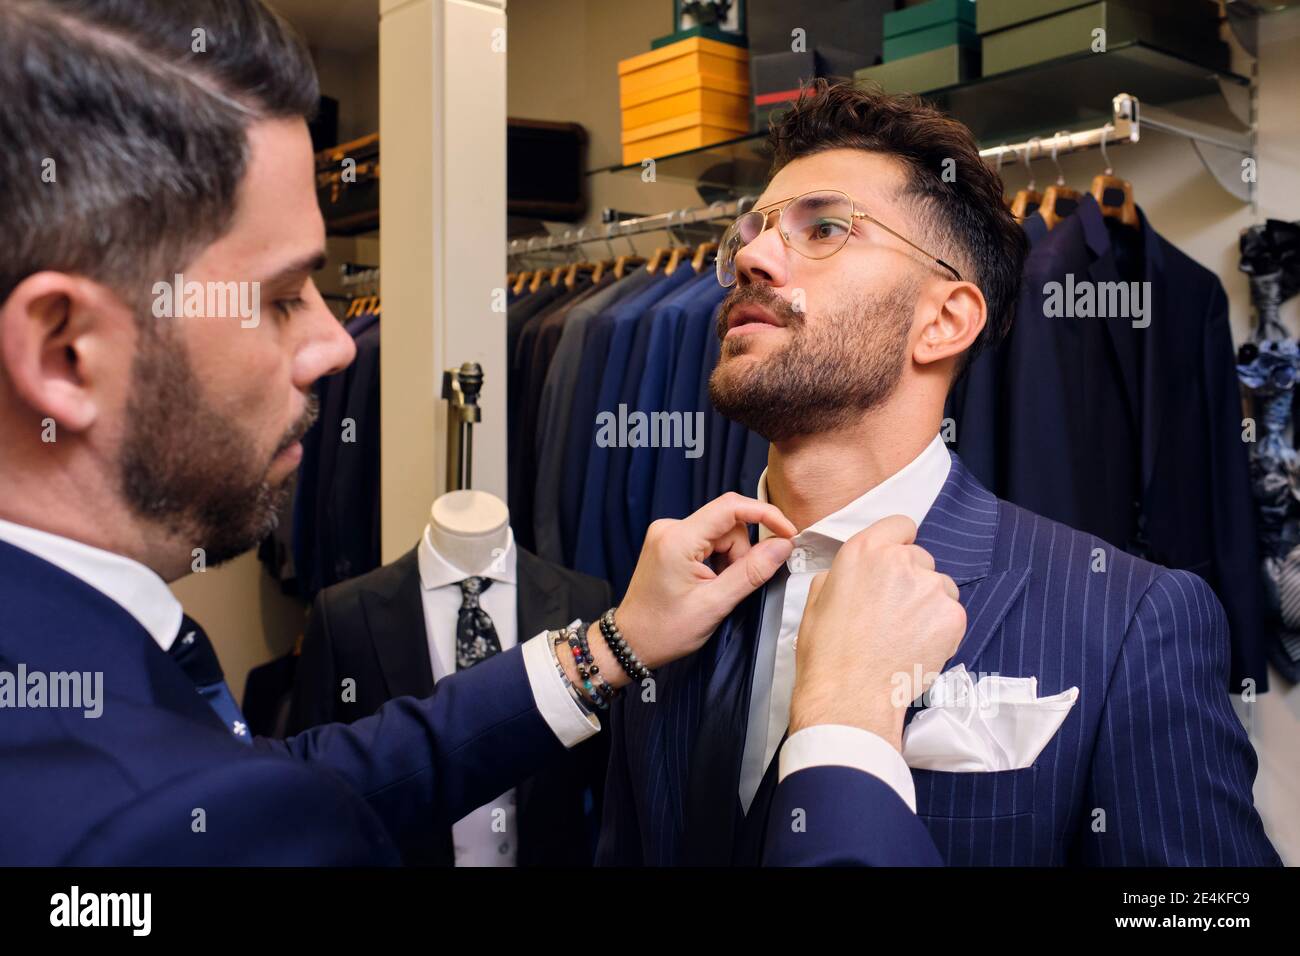 Tailor in his menswear store fastening customers collar Stock Photo